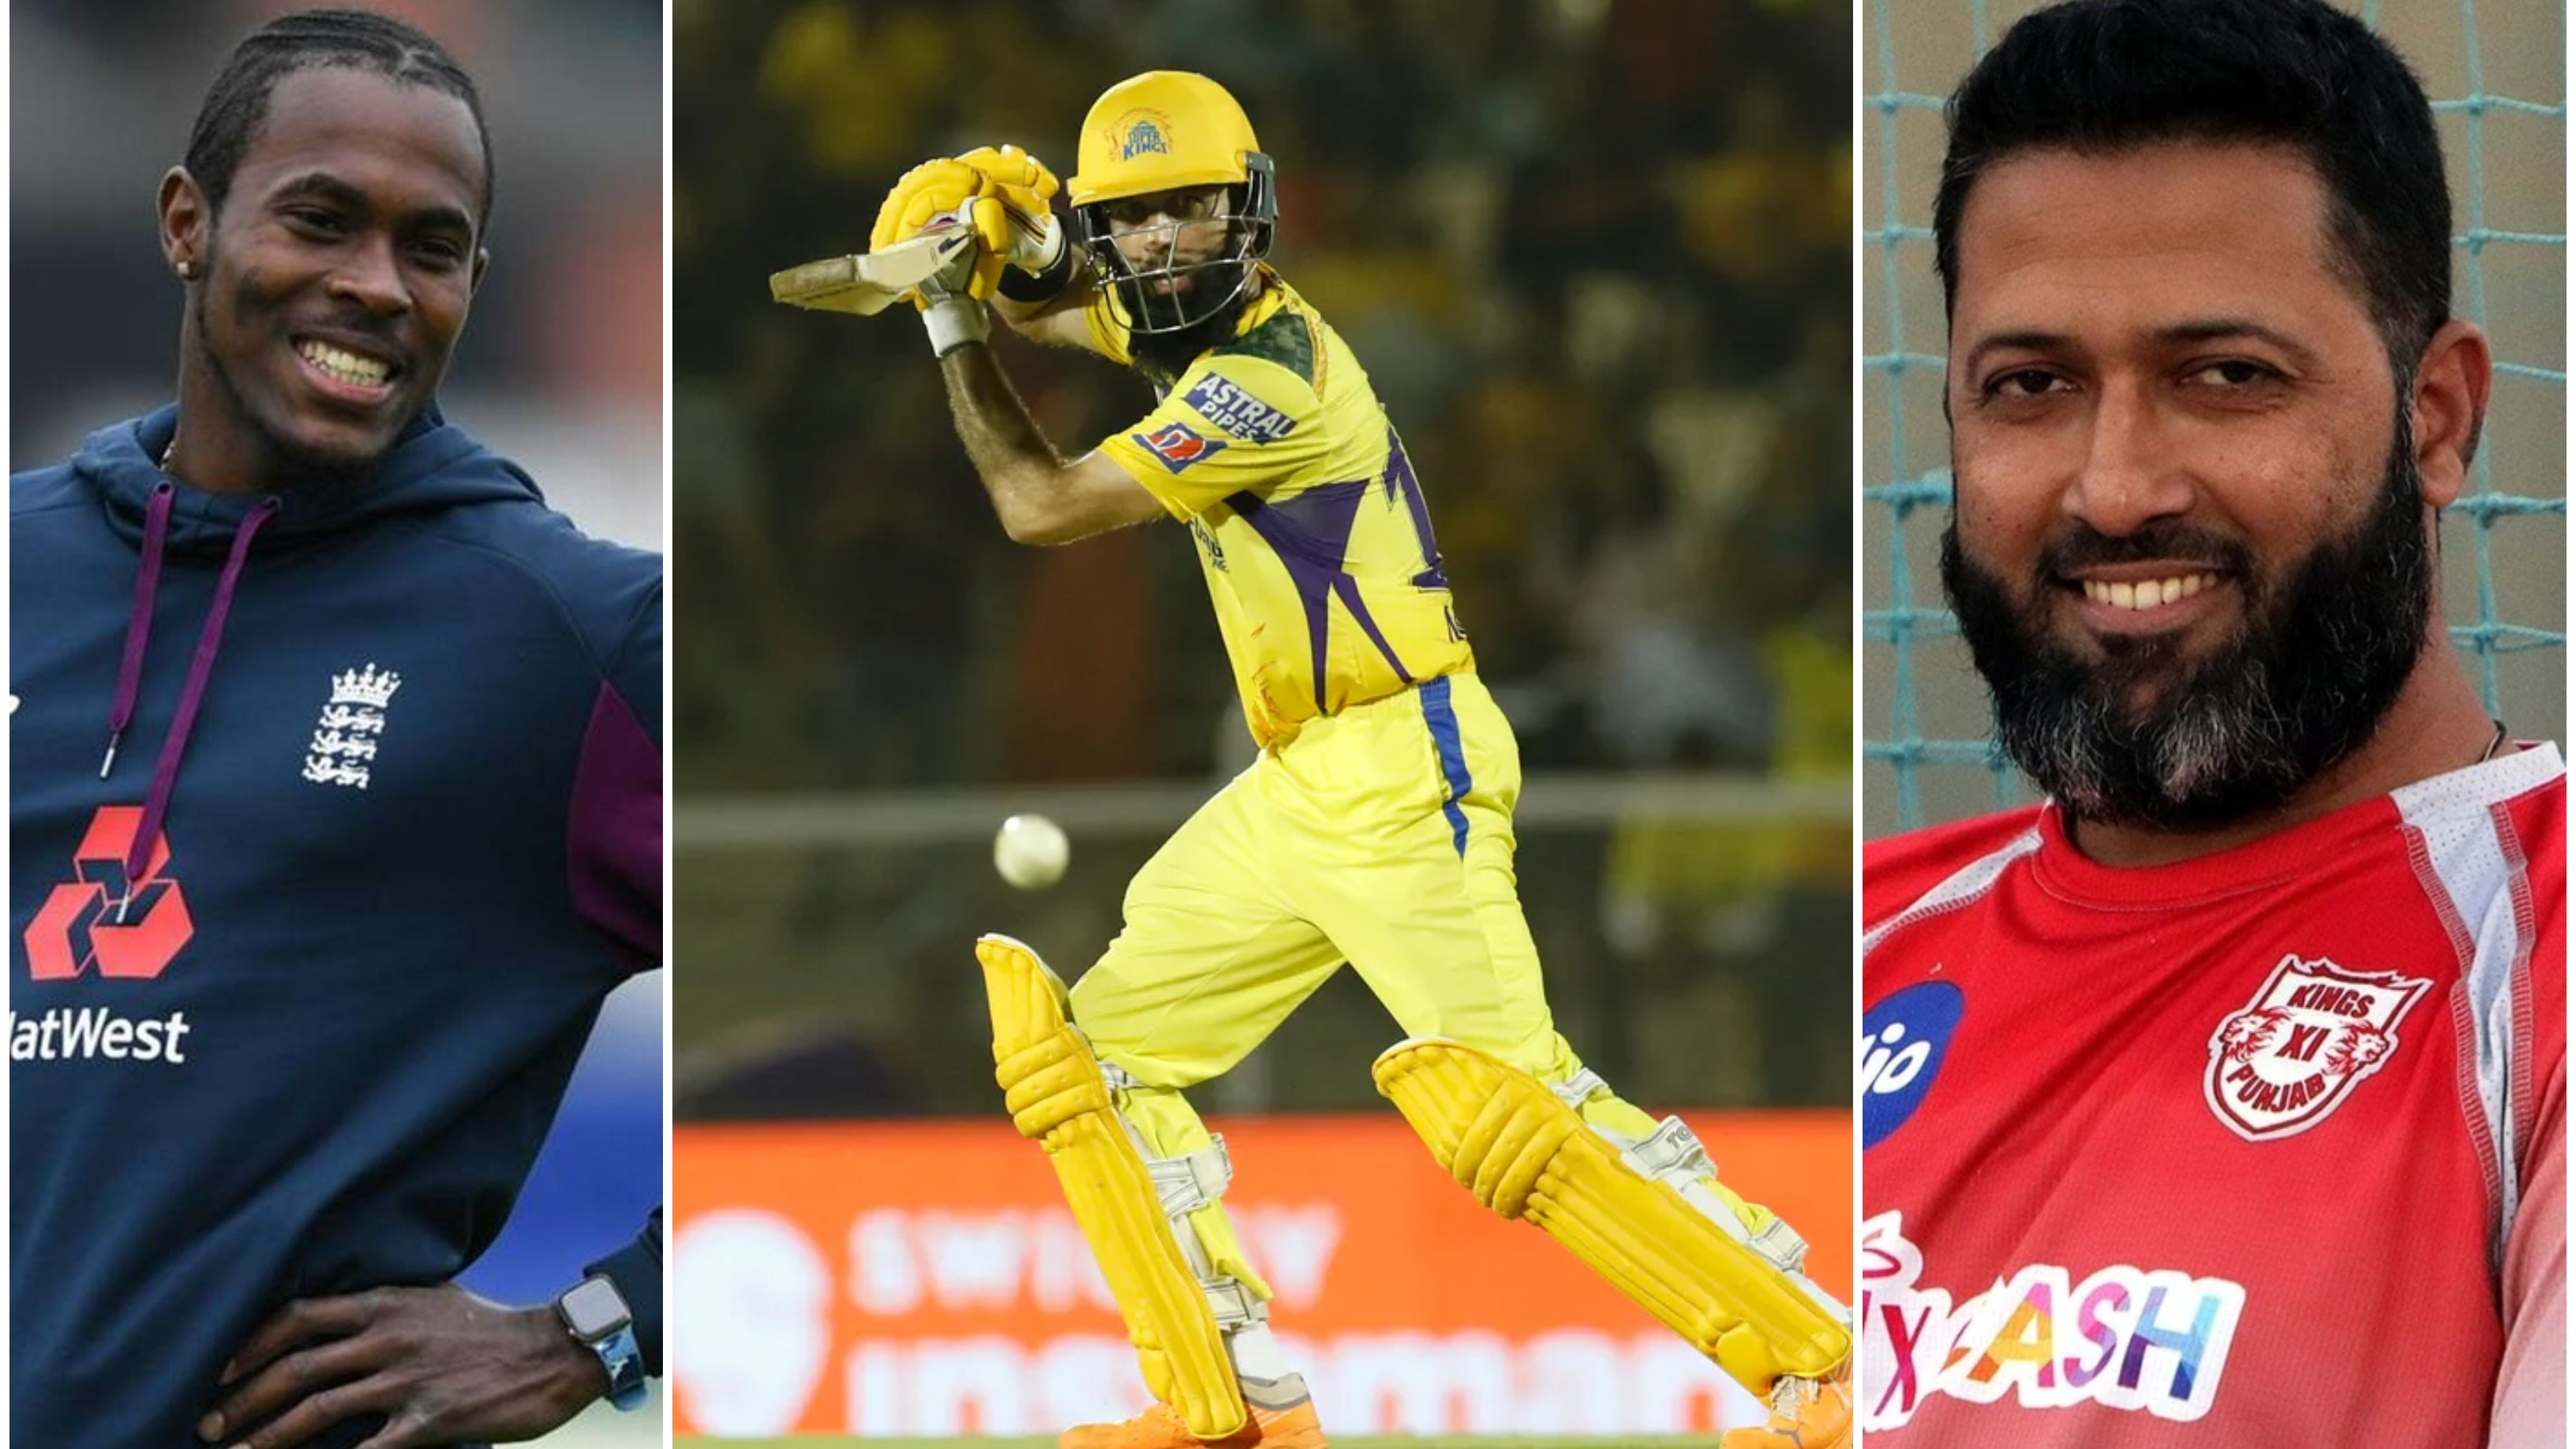 IPL 2022: Cricket fraternity lauds Moeen Ali as he slams 93 in CSK’s total of 150/6 against RR